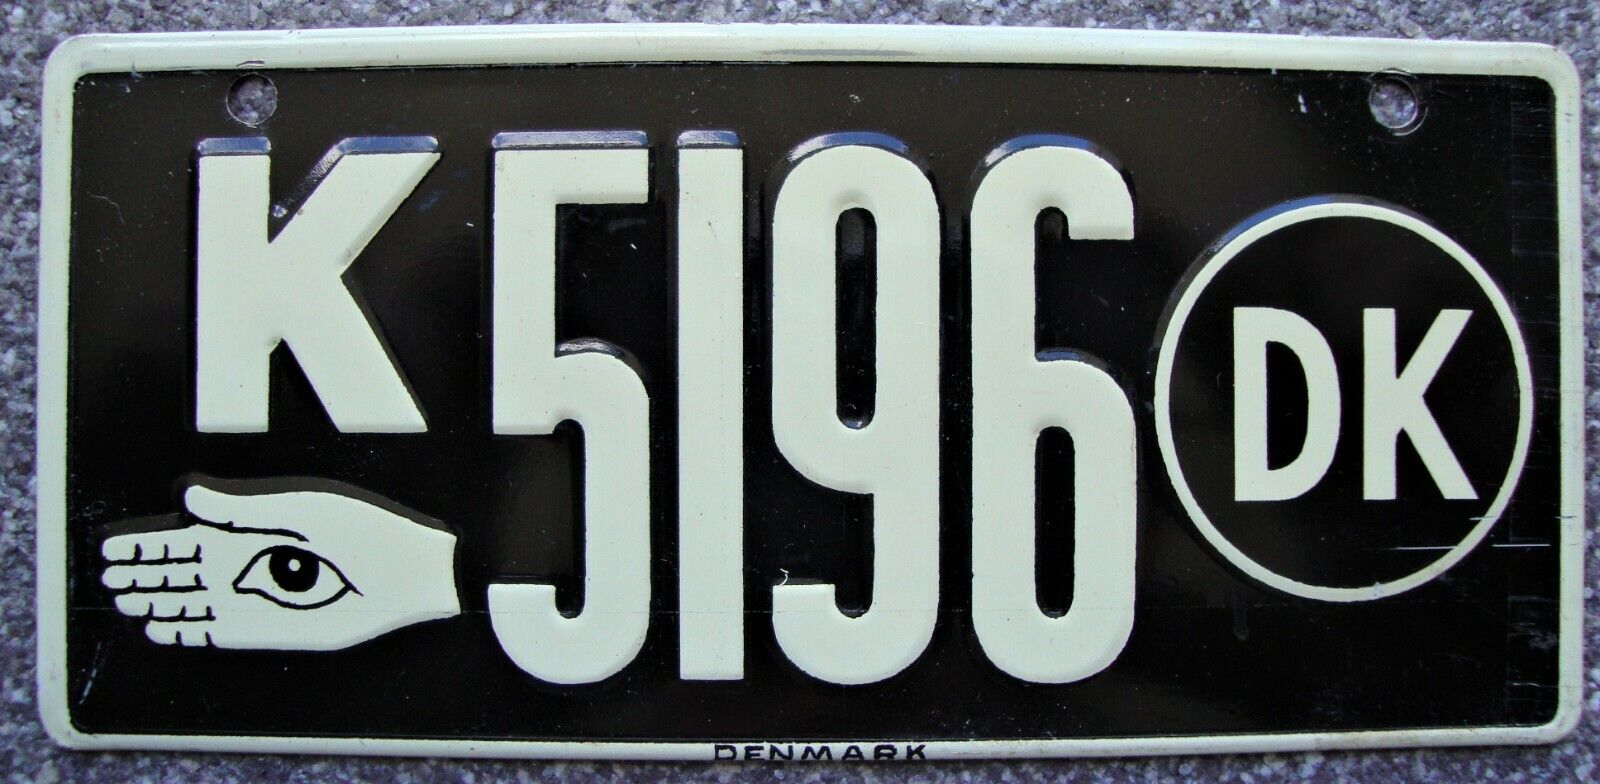 Denmark Wheaties Bicycle License Plate - Nifty Ear Hand Symbol - 1953